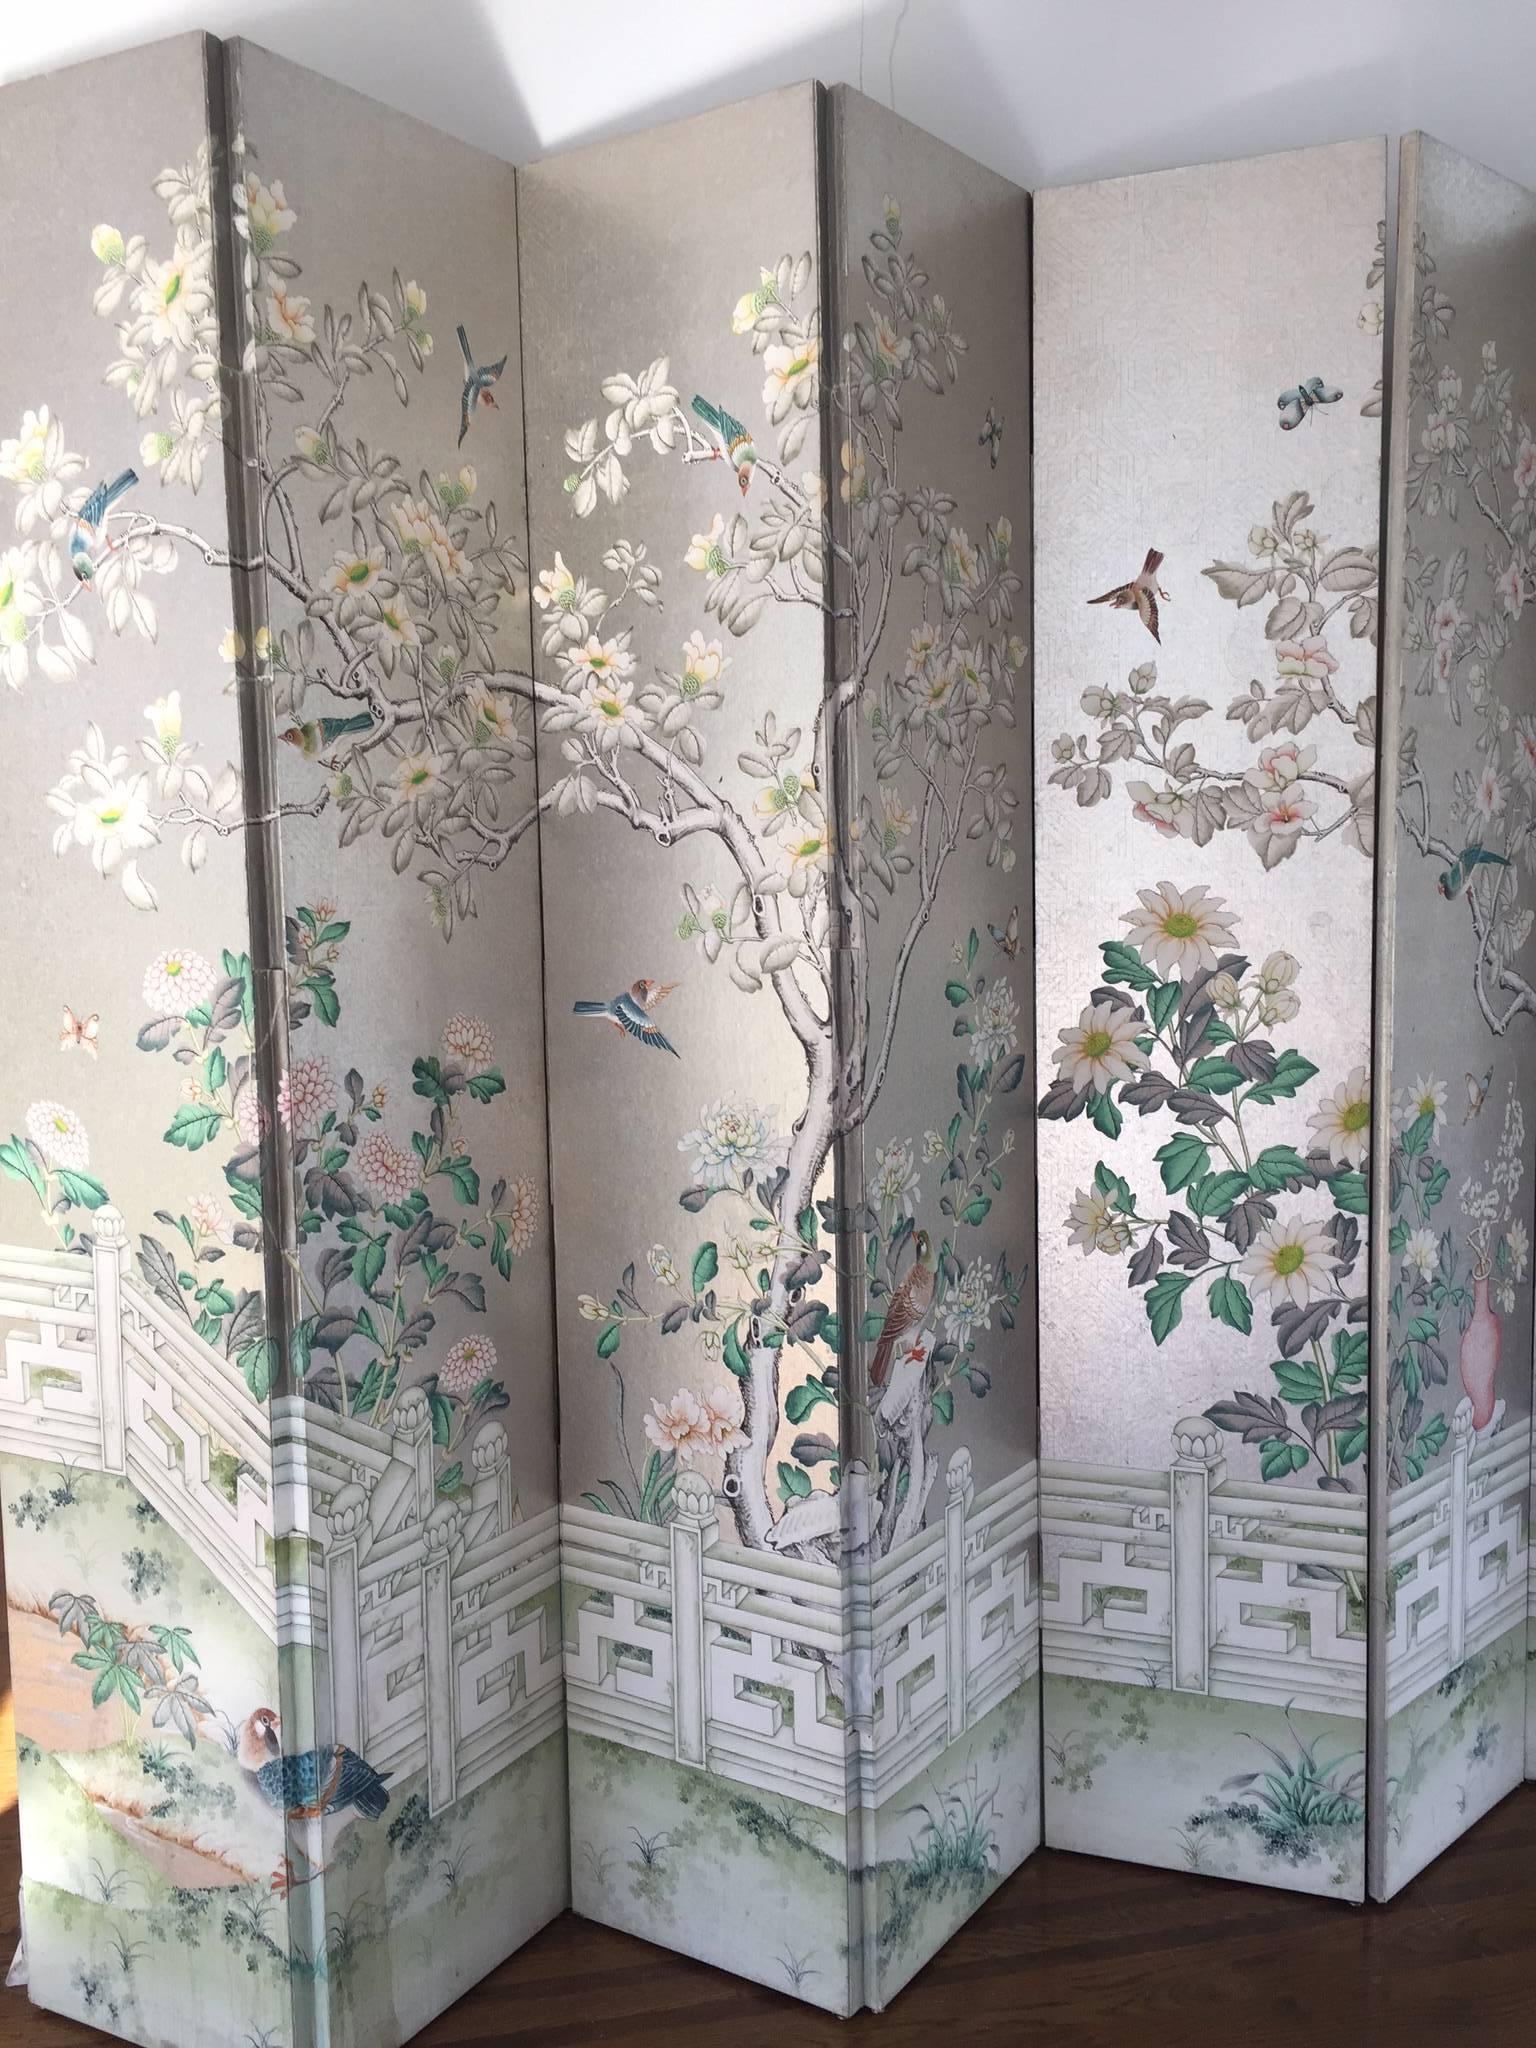 Two breathtakingly tall five-panel super glamorous screens, hand-painted with metallic silver background and adorned with an Asian inspired garden scene having foliage, birds, butterflies and lattice fence at the bottom.
Measures: Each panel is 92